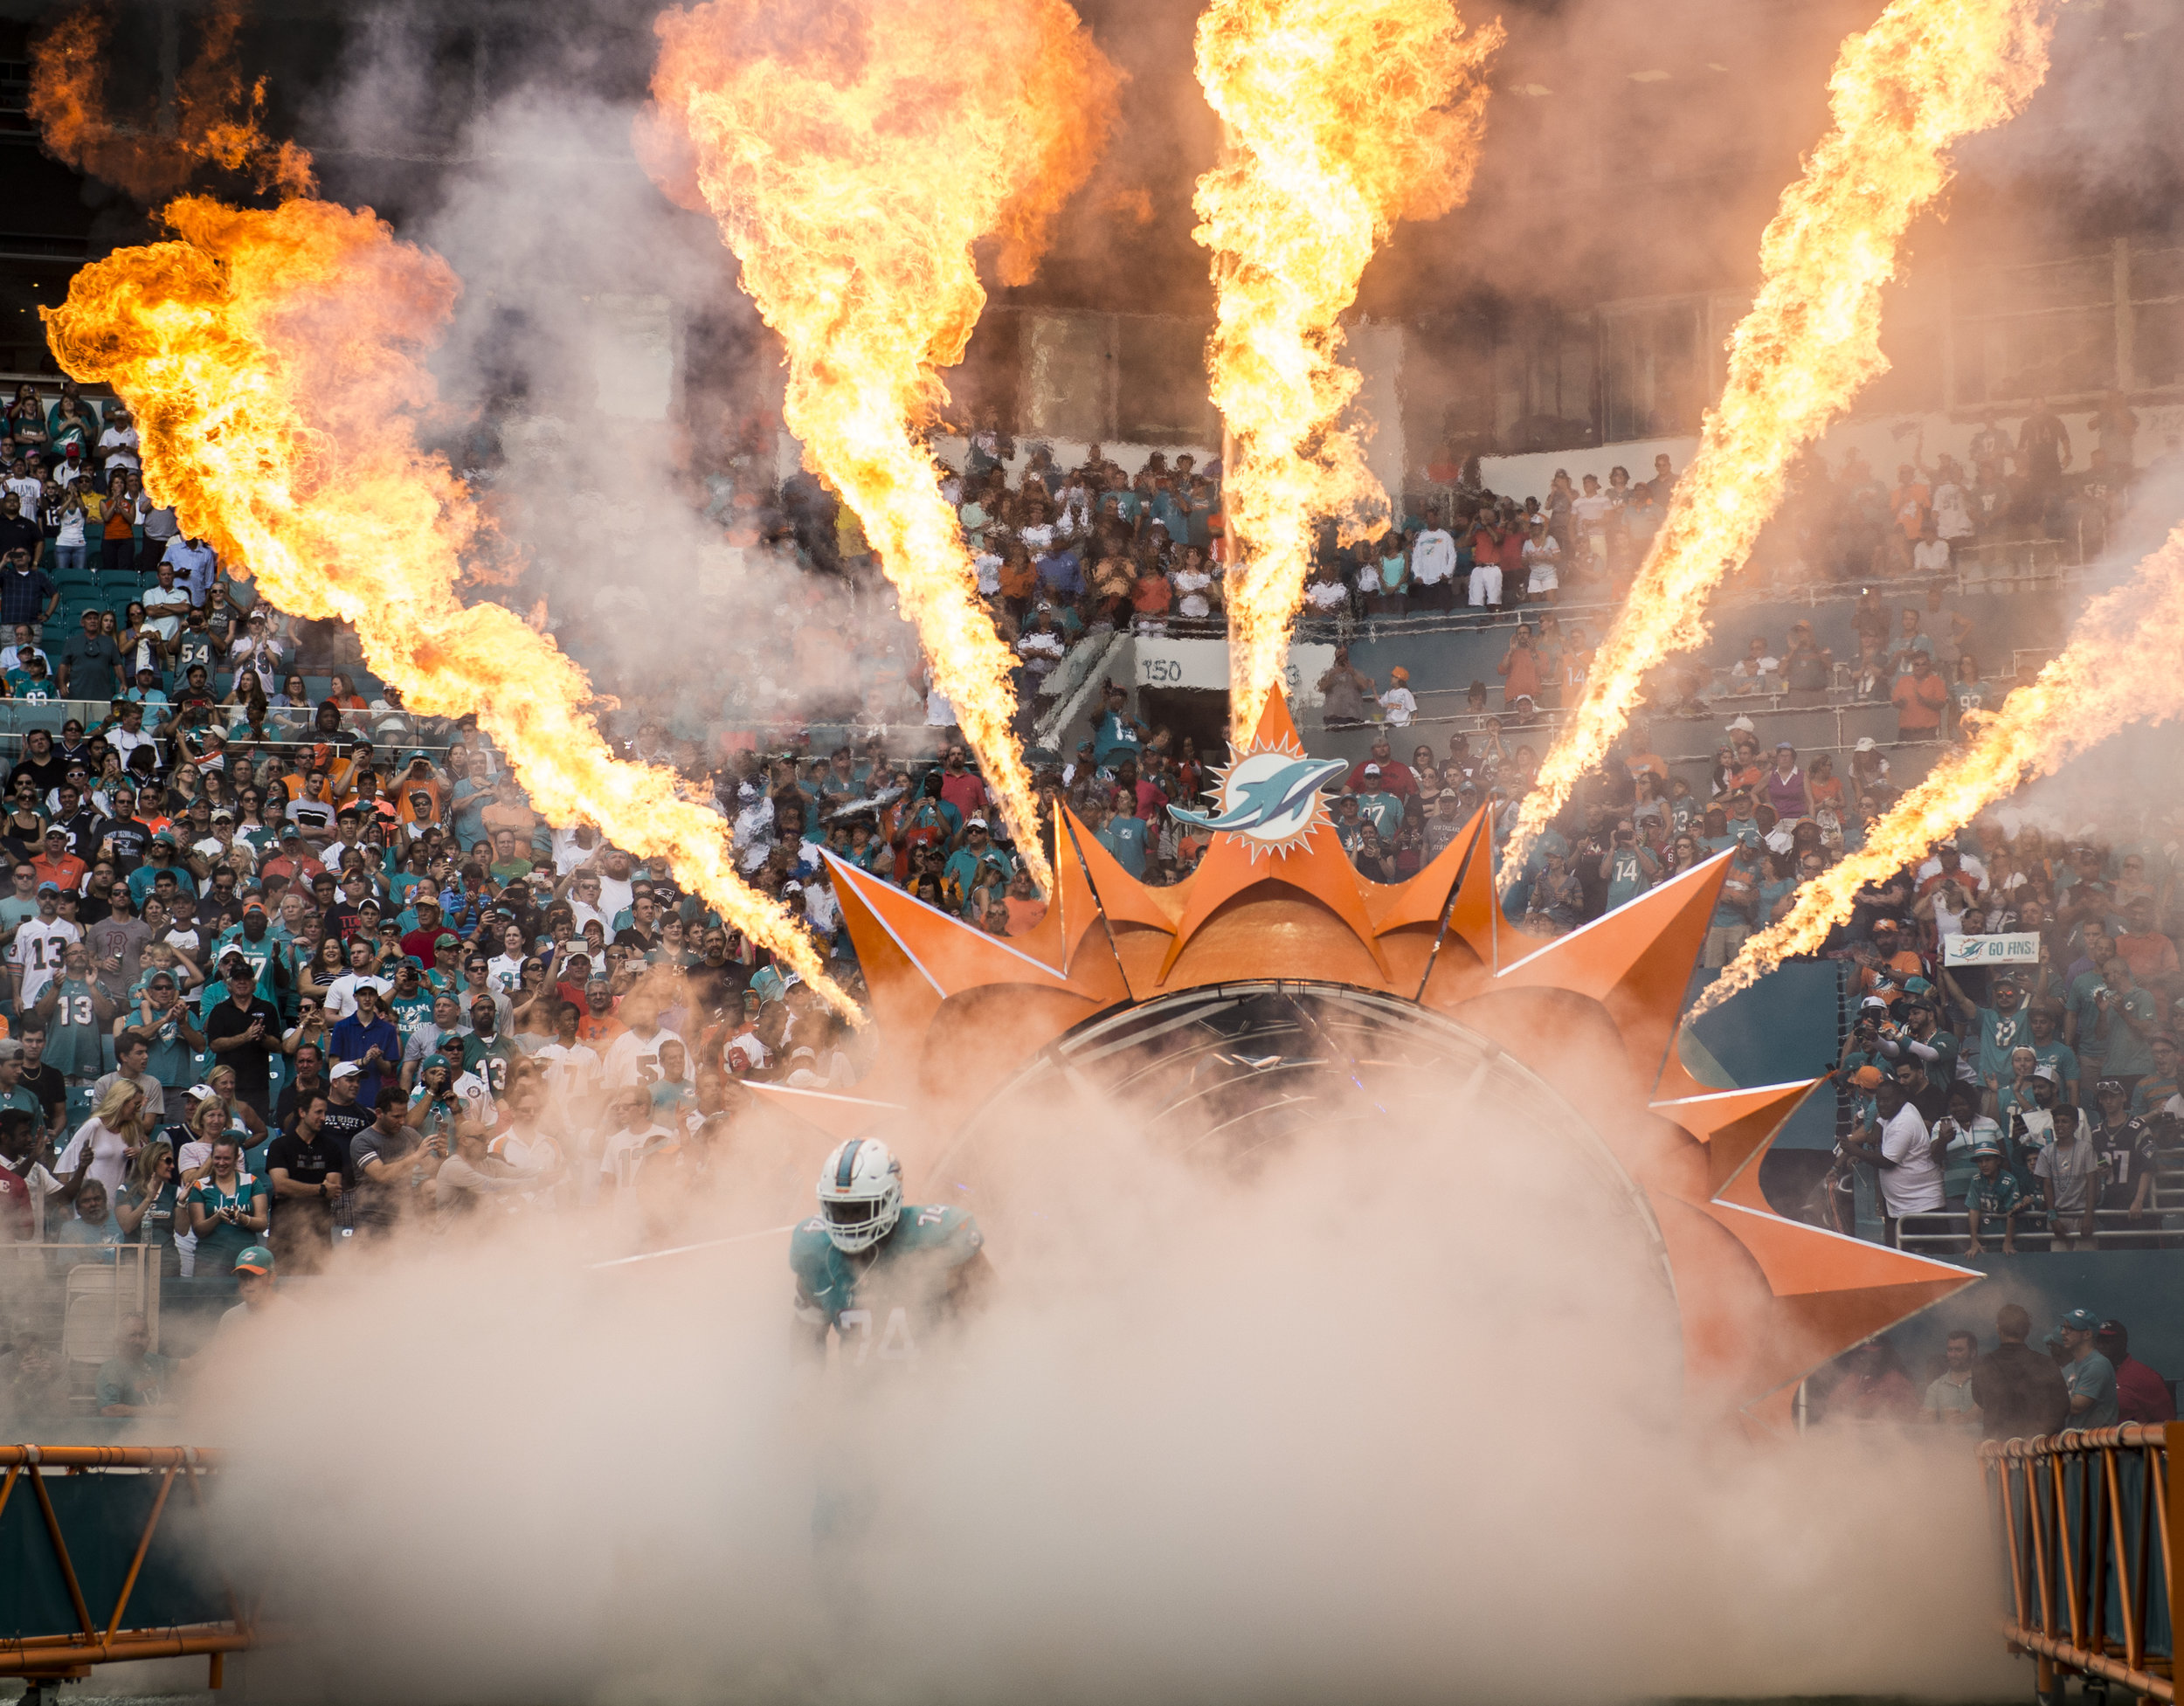  Miami Dolphins tackle Jermon Bushrod makes his entrance into the game versus the New England Patriots at Hard Rock Stadium in Miami Gardens, Florida, January 1, 2017. 